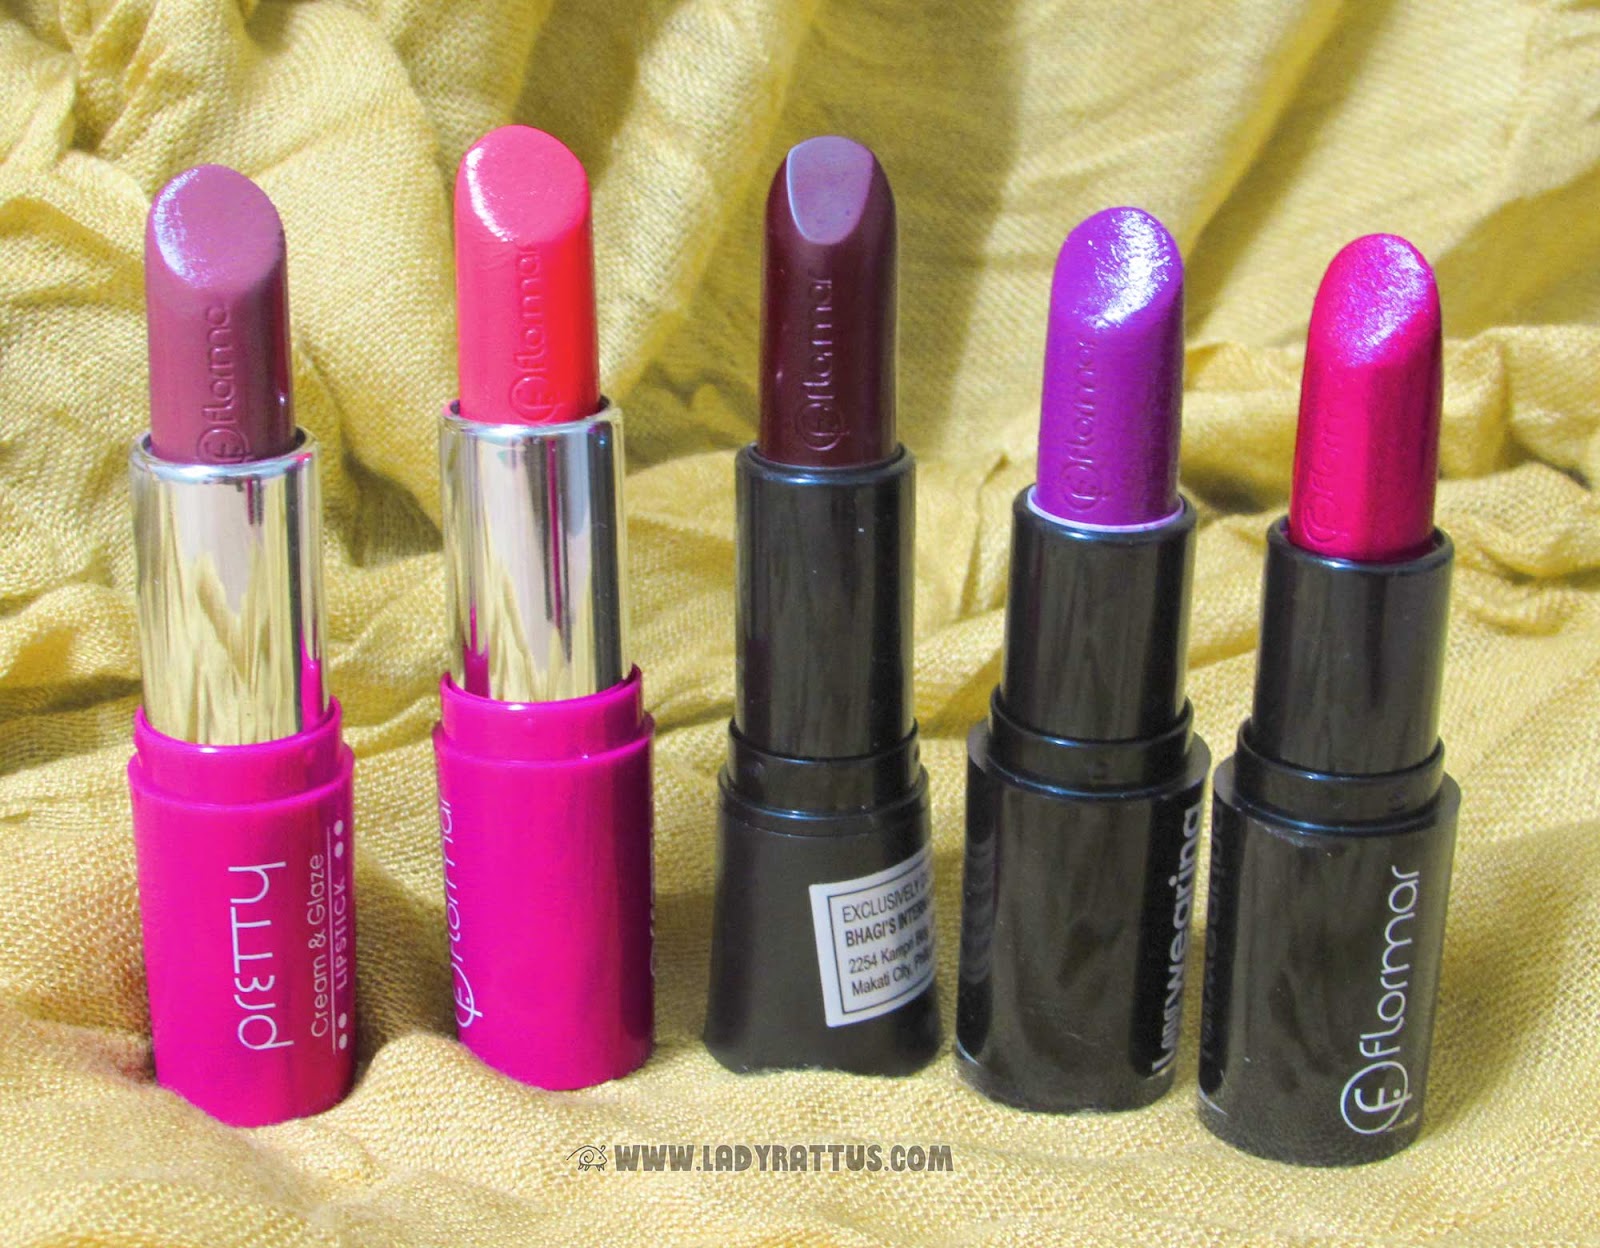 Flormar Cream/Glaze Lipstick in Royal Berry and Fiesta Red